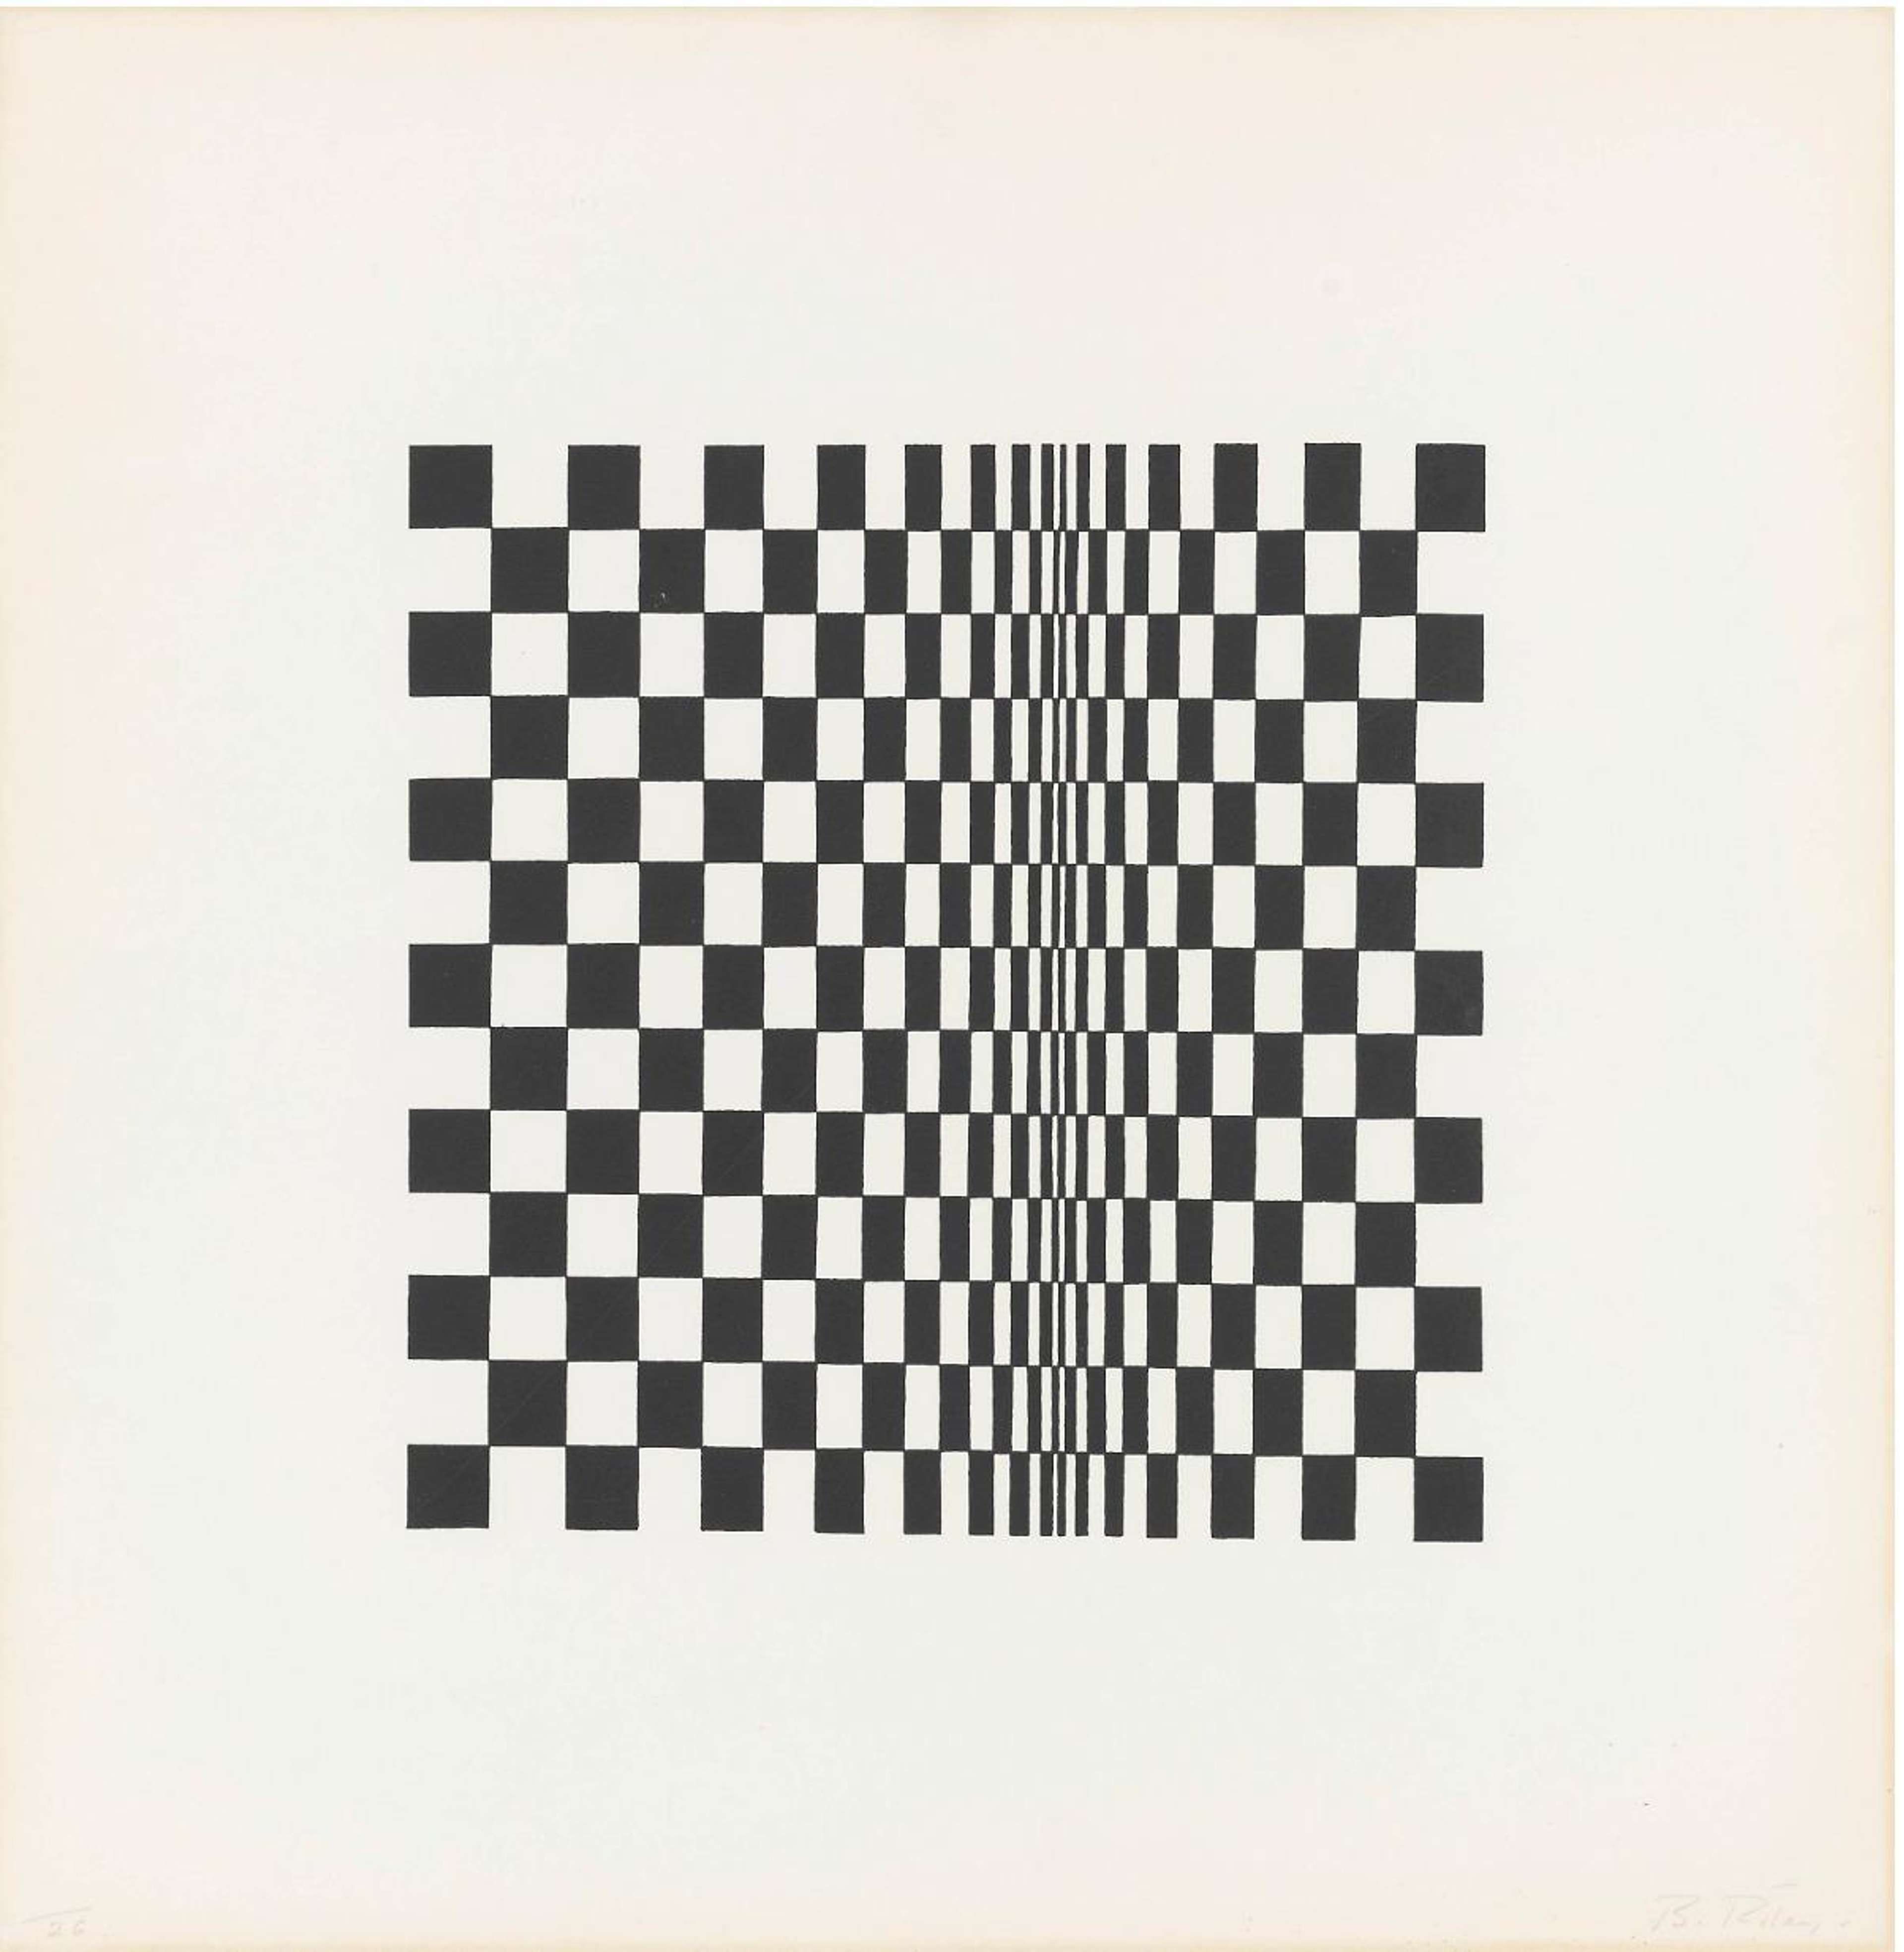 Untitled (Based On Movement In Squares) by Bridget Riley - MyArtBroker